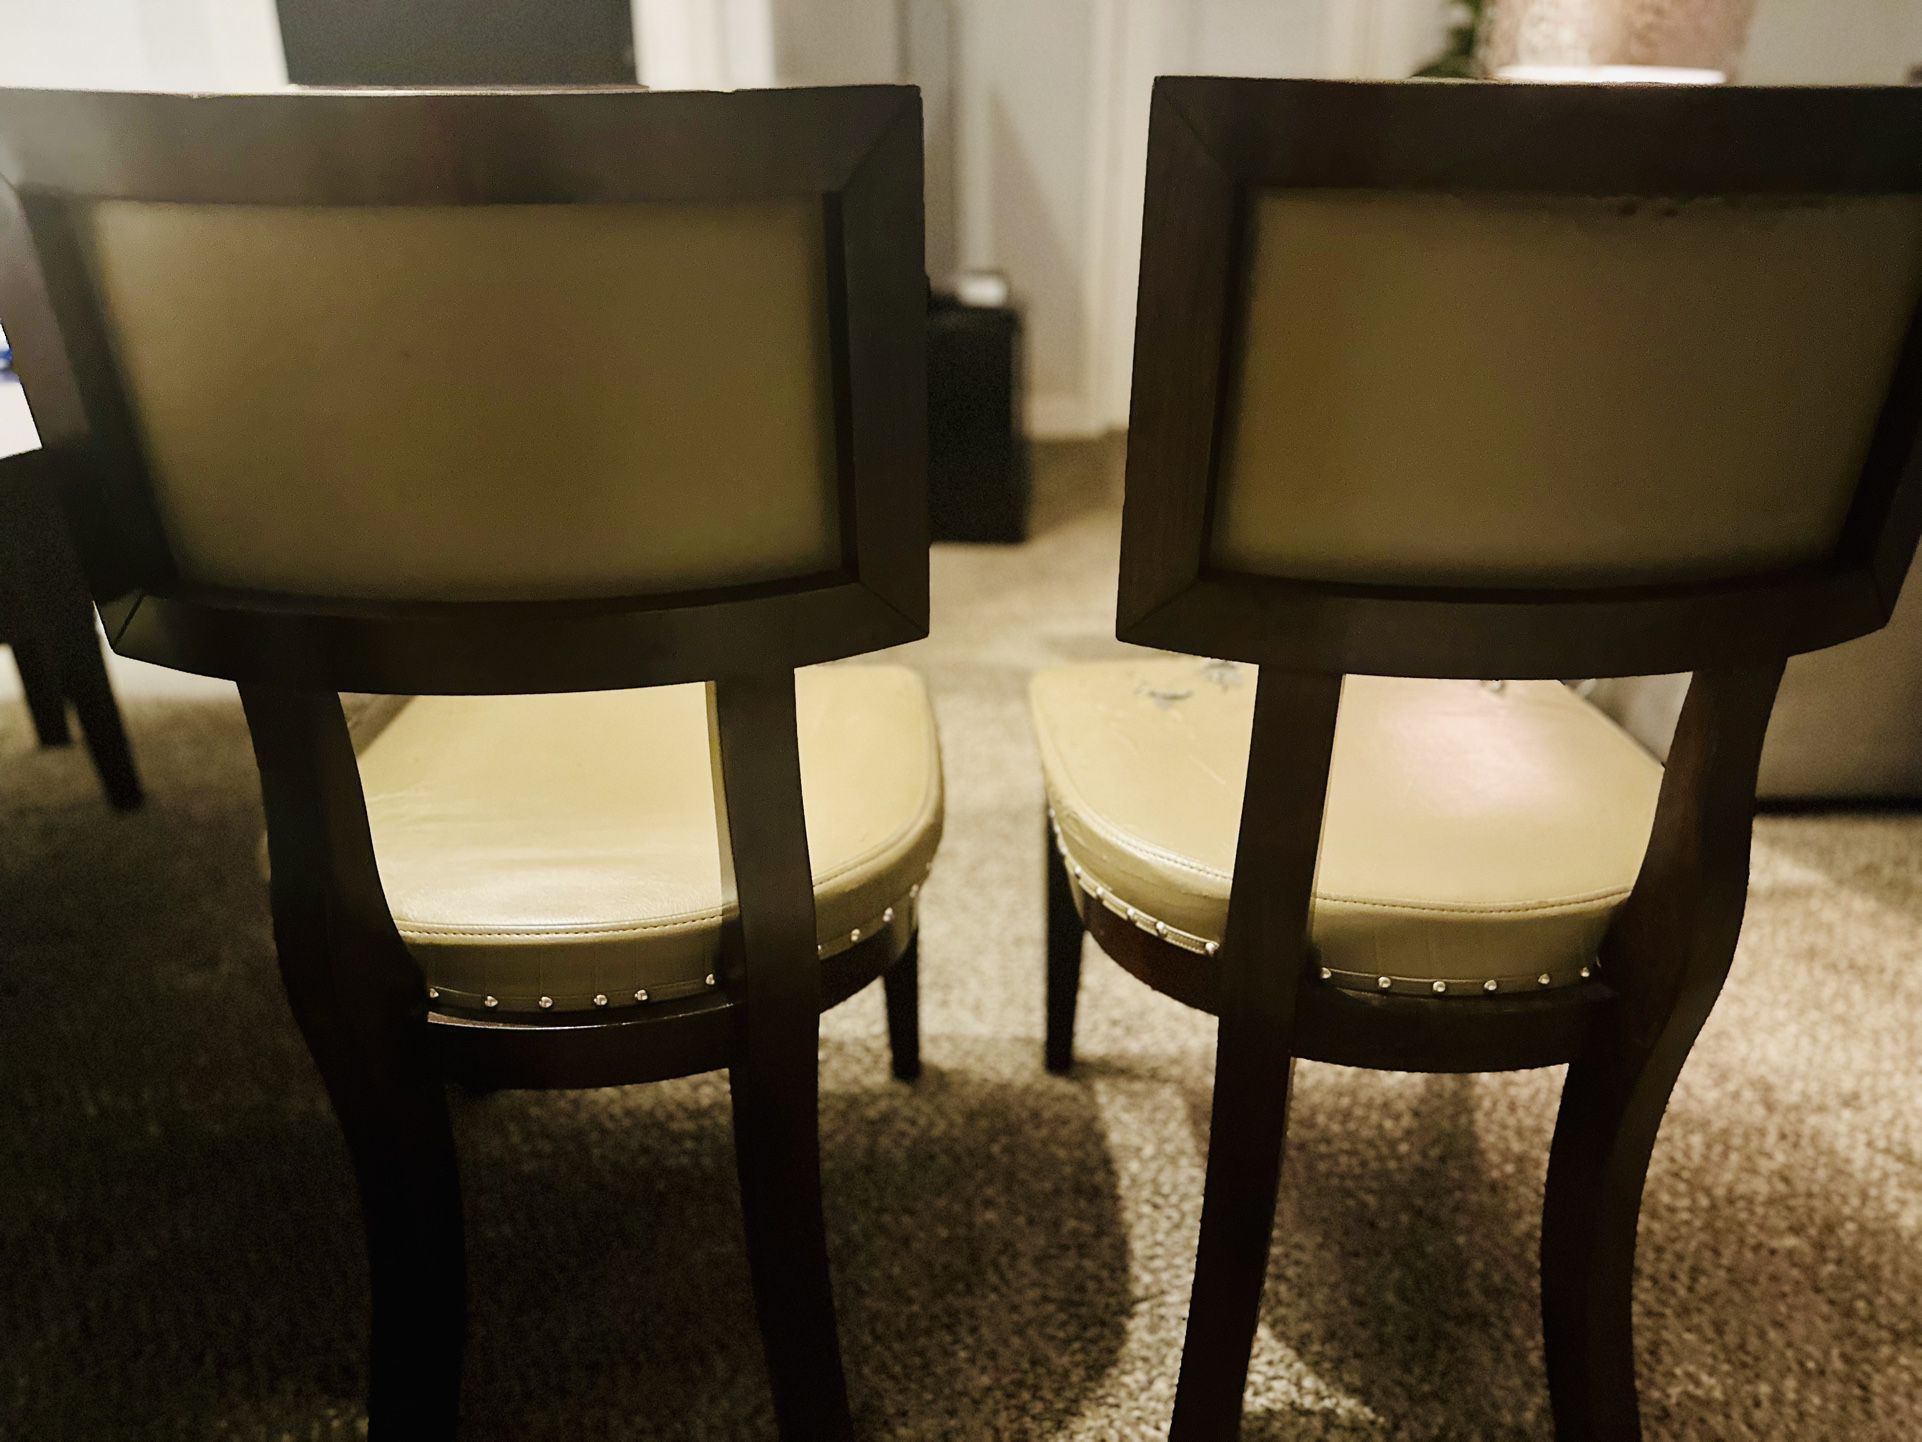 Dining Table Chairs All 4 For $70